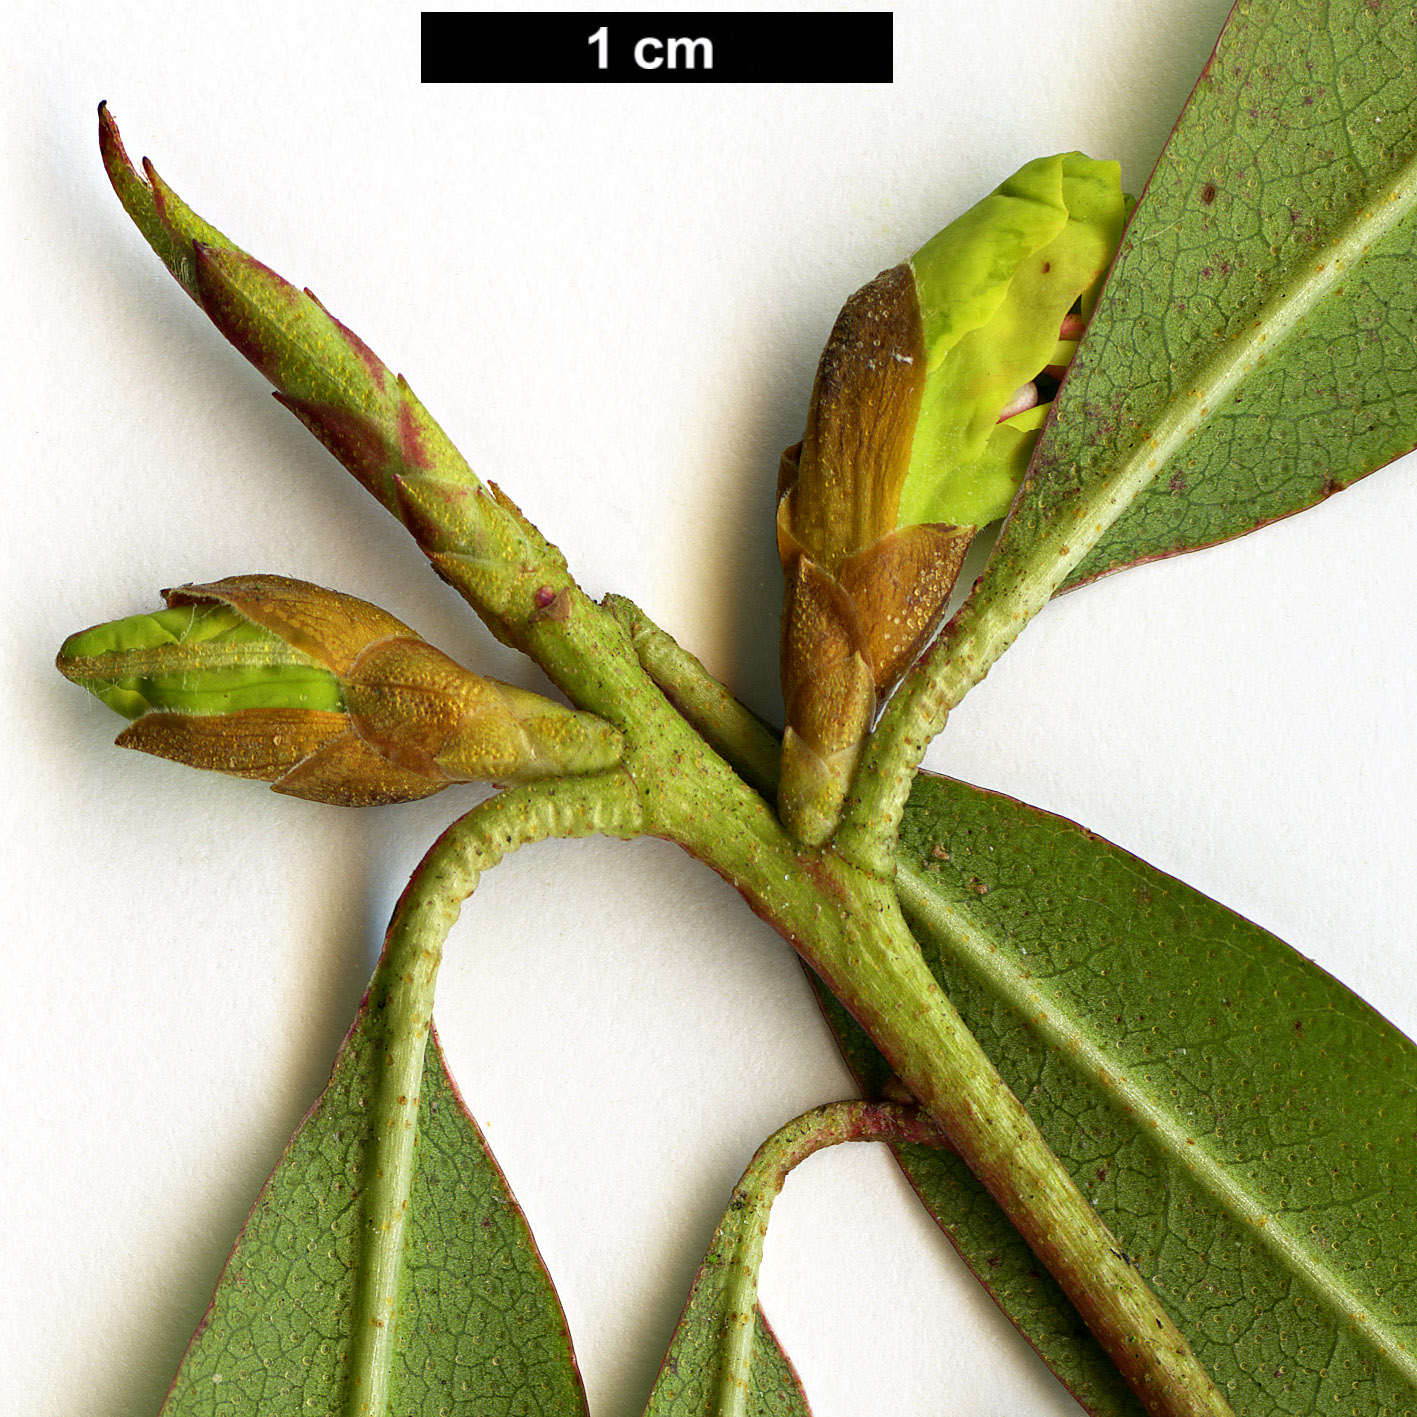 High resolution image: Family: Ericaceae - Genus: Rhododendron - Taxon: lutescens